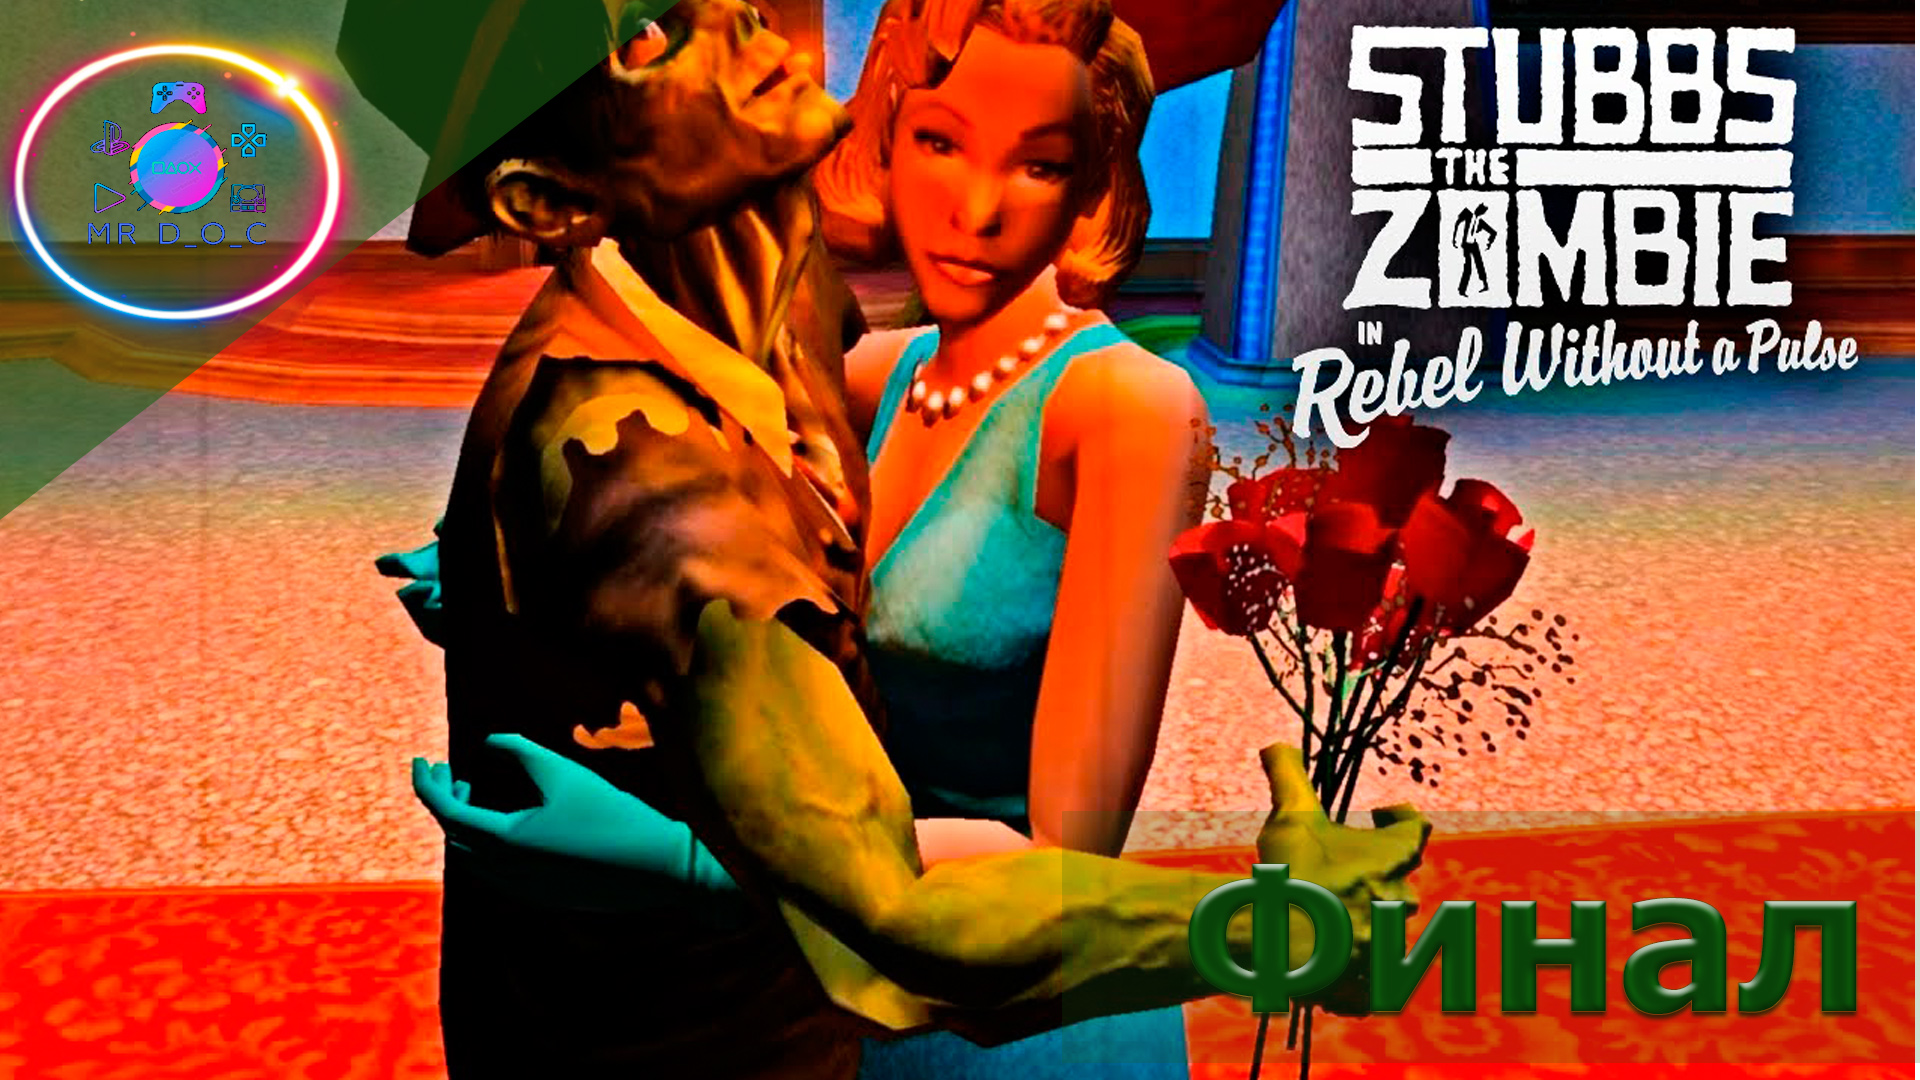 Stubbs the zombie in rebel without a pulse стим фото 106